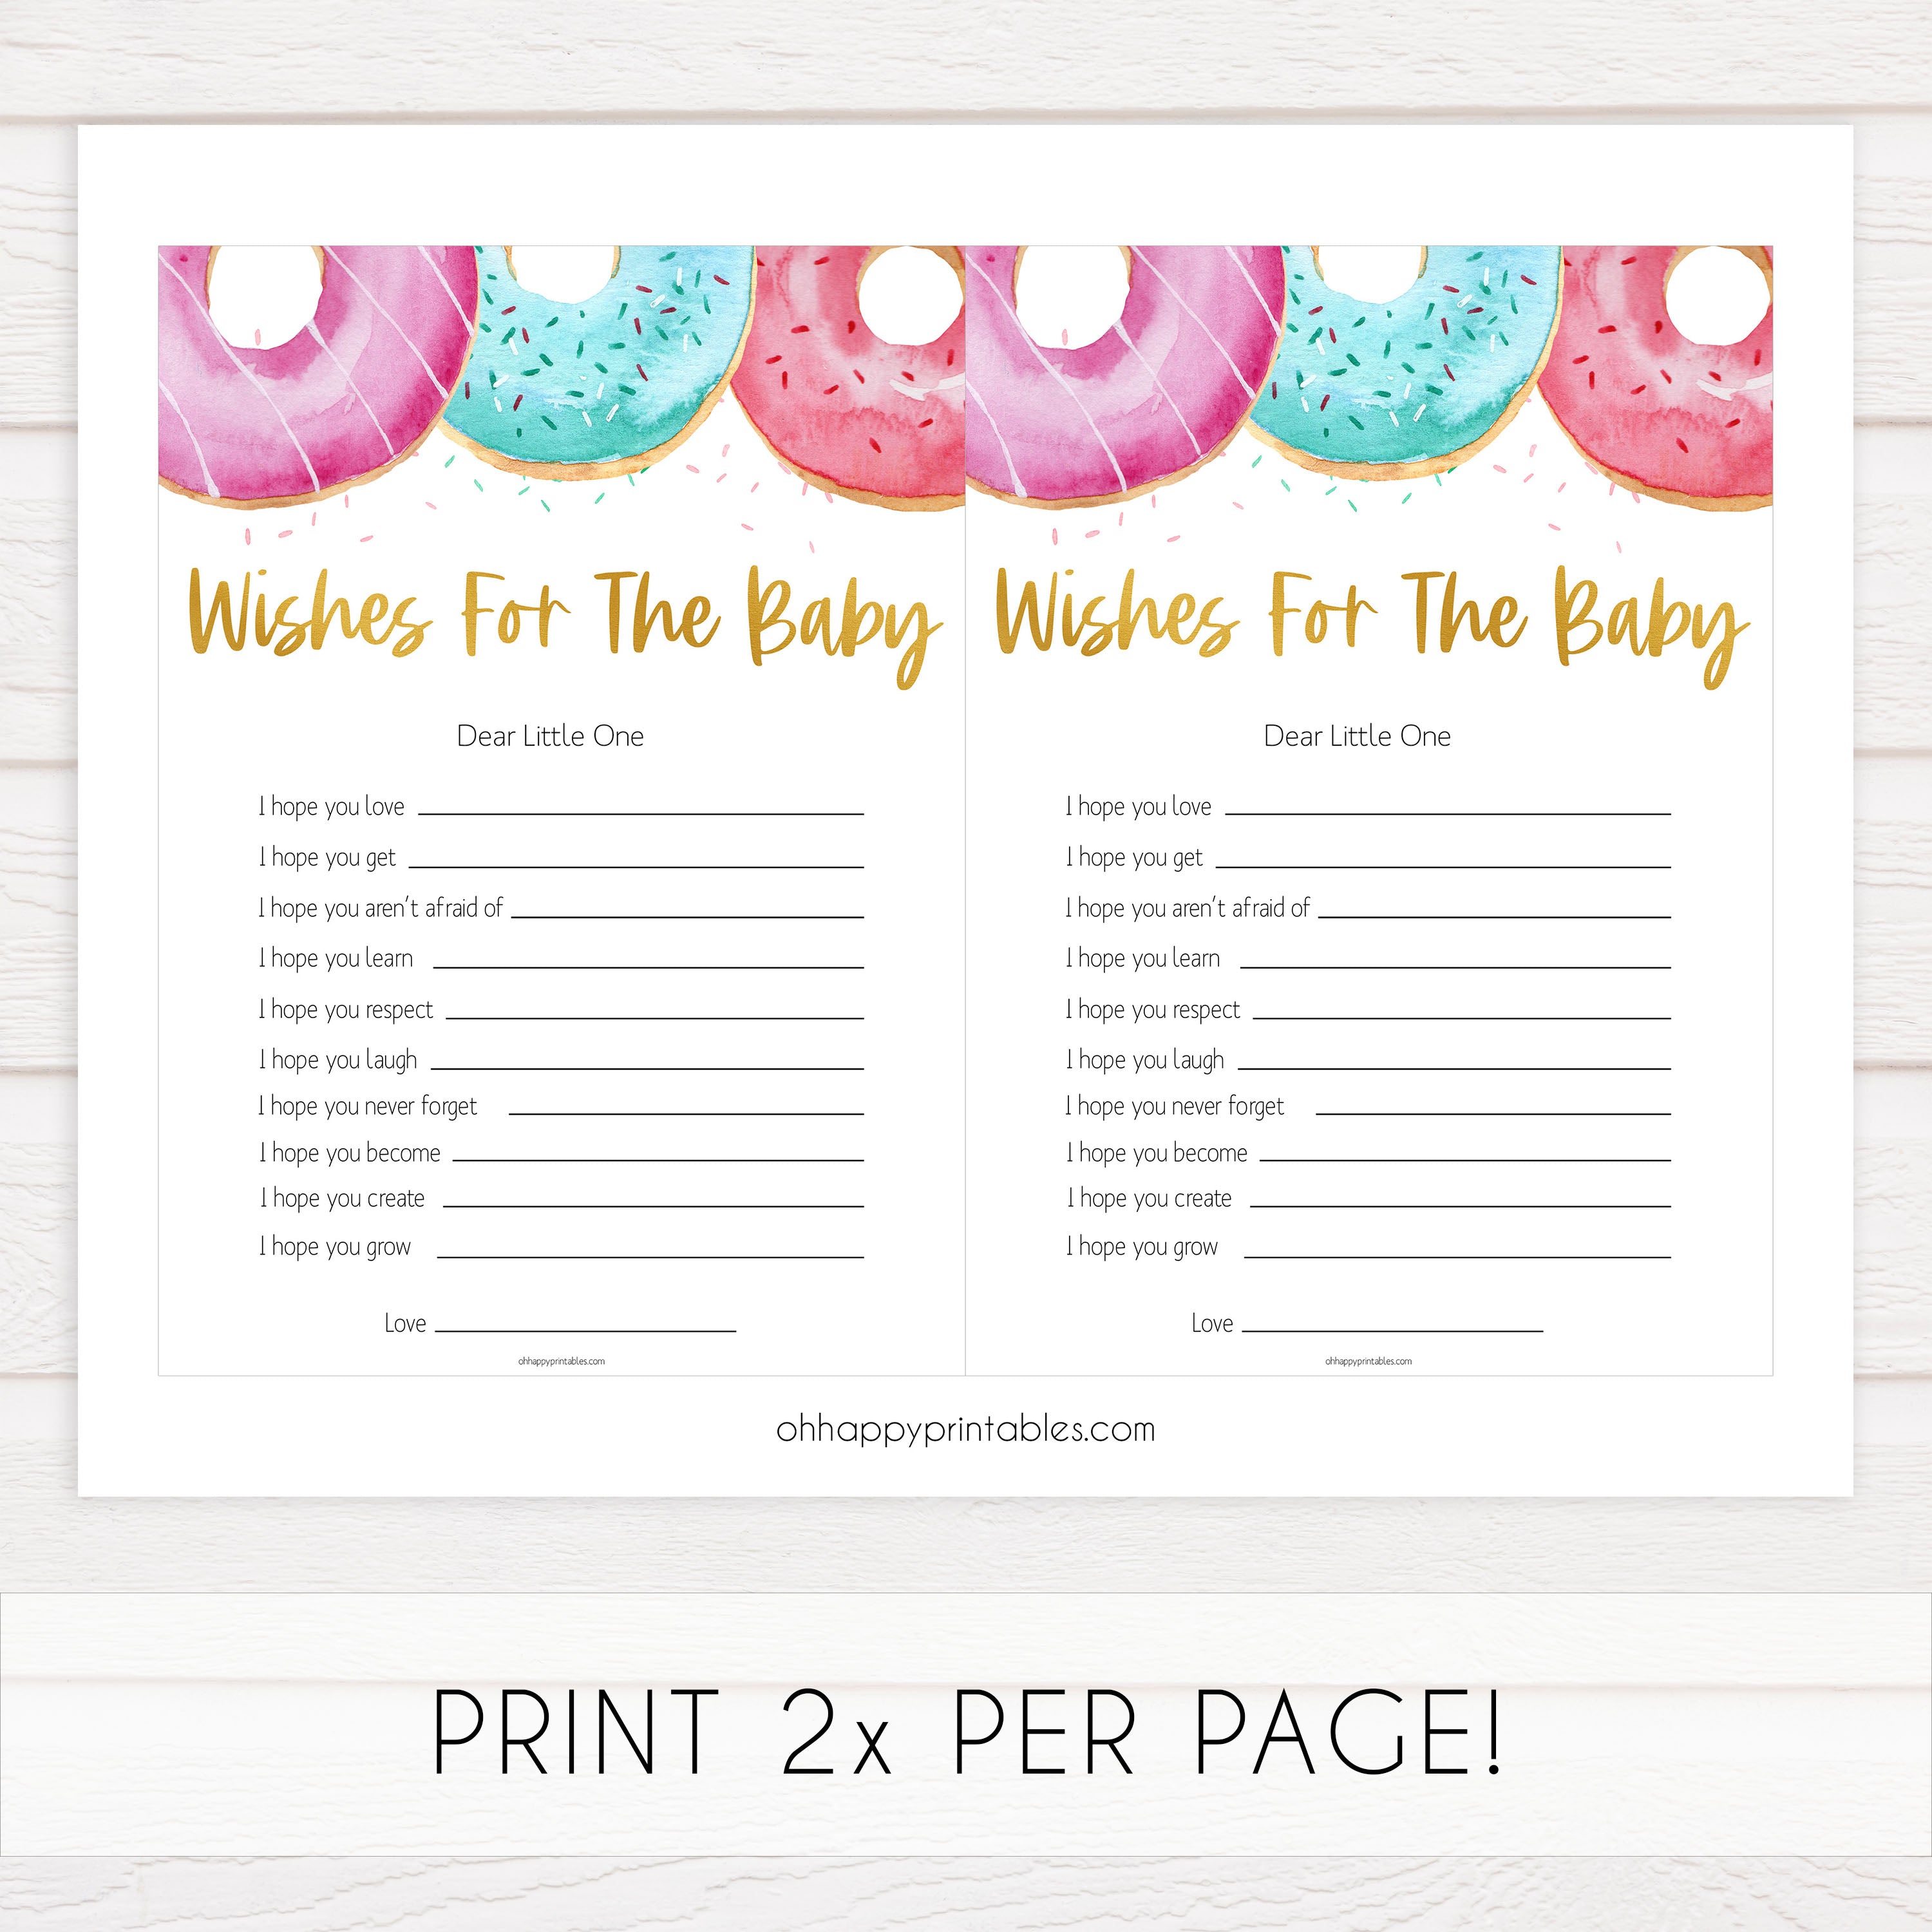 wishes for the baby game, Printable baby shower games, donut baby games, baby shower games, fun baby shower ideas, top baby shower ideas, donut sprinkles baby shower, baby shower games, fun donut baby shower ideas